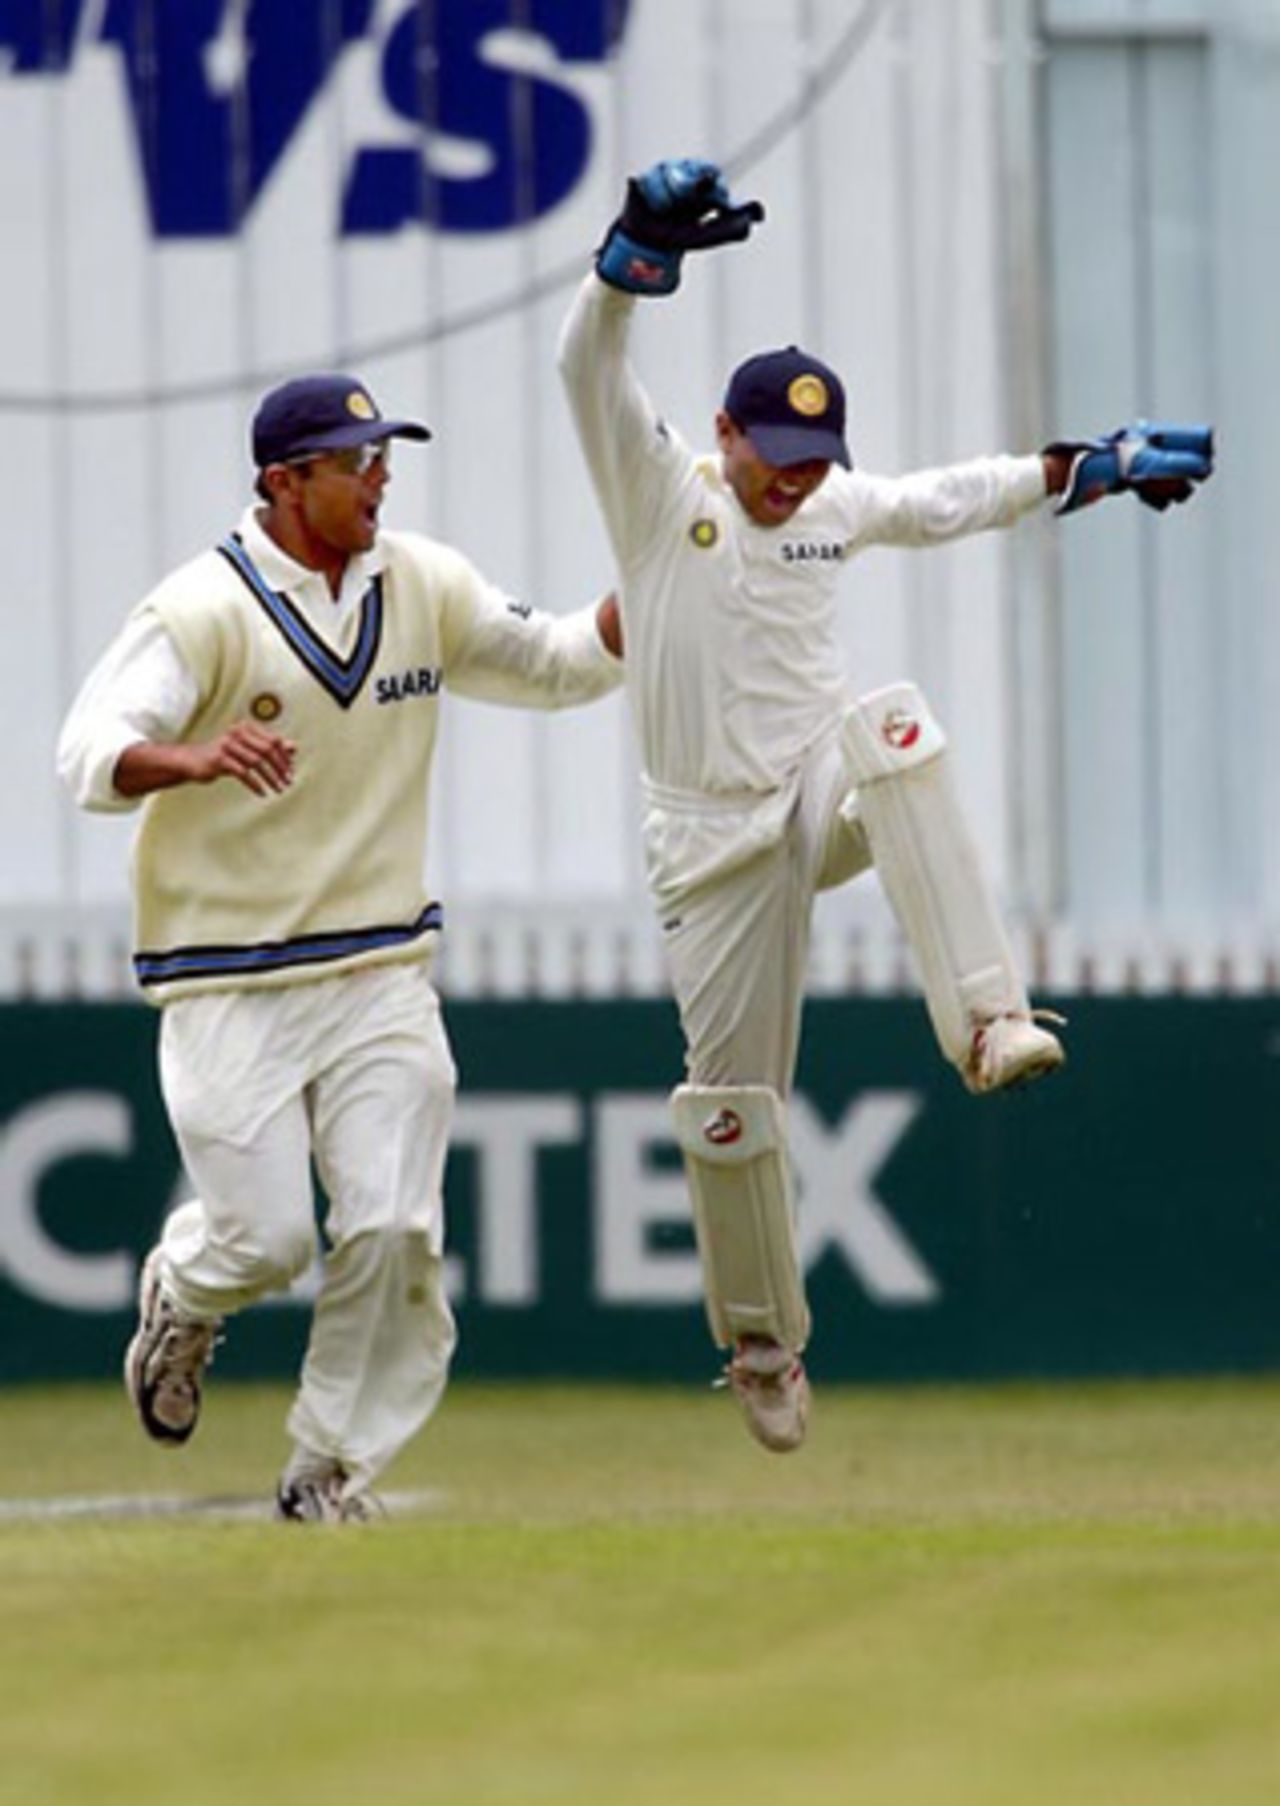 Indian fielder Rahul Dravid (left) and wicket-keeper Parthiv Patel celebrate the dismissal of New Zealand batsman Nathan Astle, caught by Patel off the bowling of Zaheer Khan for 14 in his second innings. 2nd Test: New Zealand v India at Westpac Park, Hamilton, 19-23 December 2002 (22 December 2002).